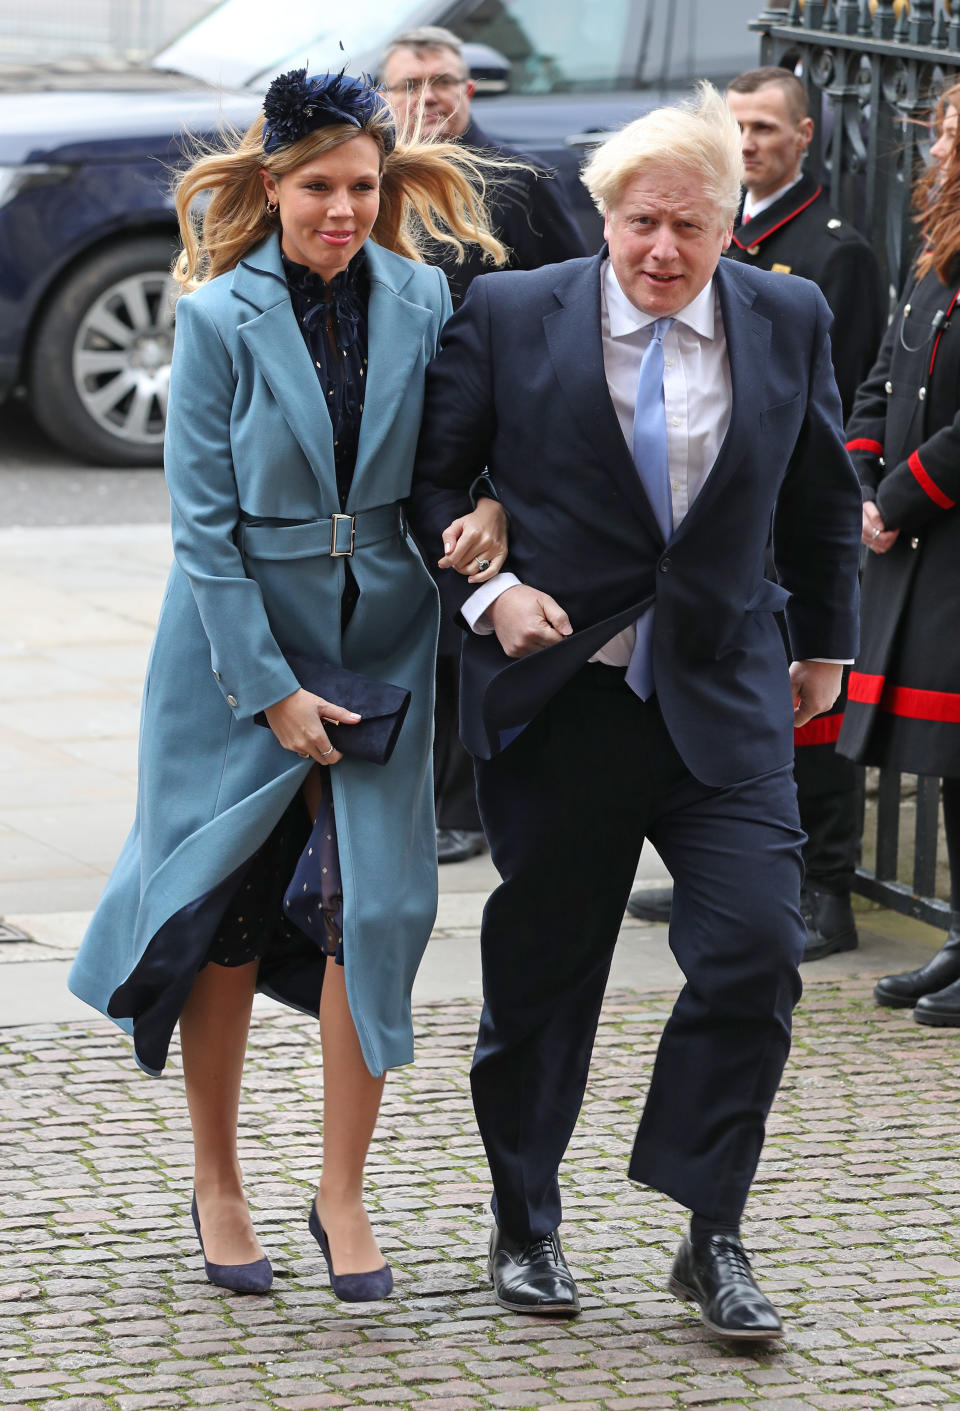 File photo dated 09/03/20 of Prime Minister Boris Johnson and partner Carrie Symonds arriving at the Commonwealth Service at Westminster Abbey, London on Commonwealth Day.